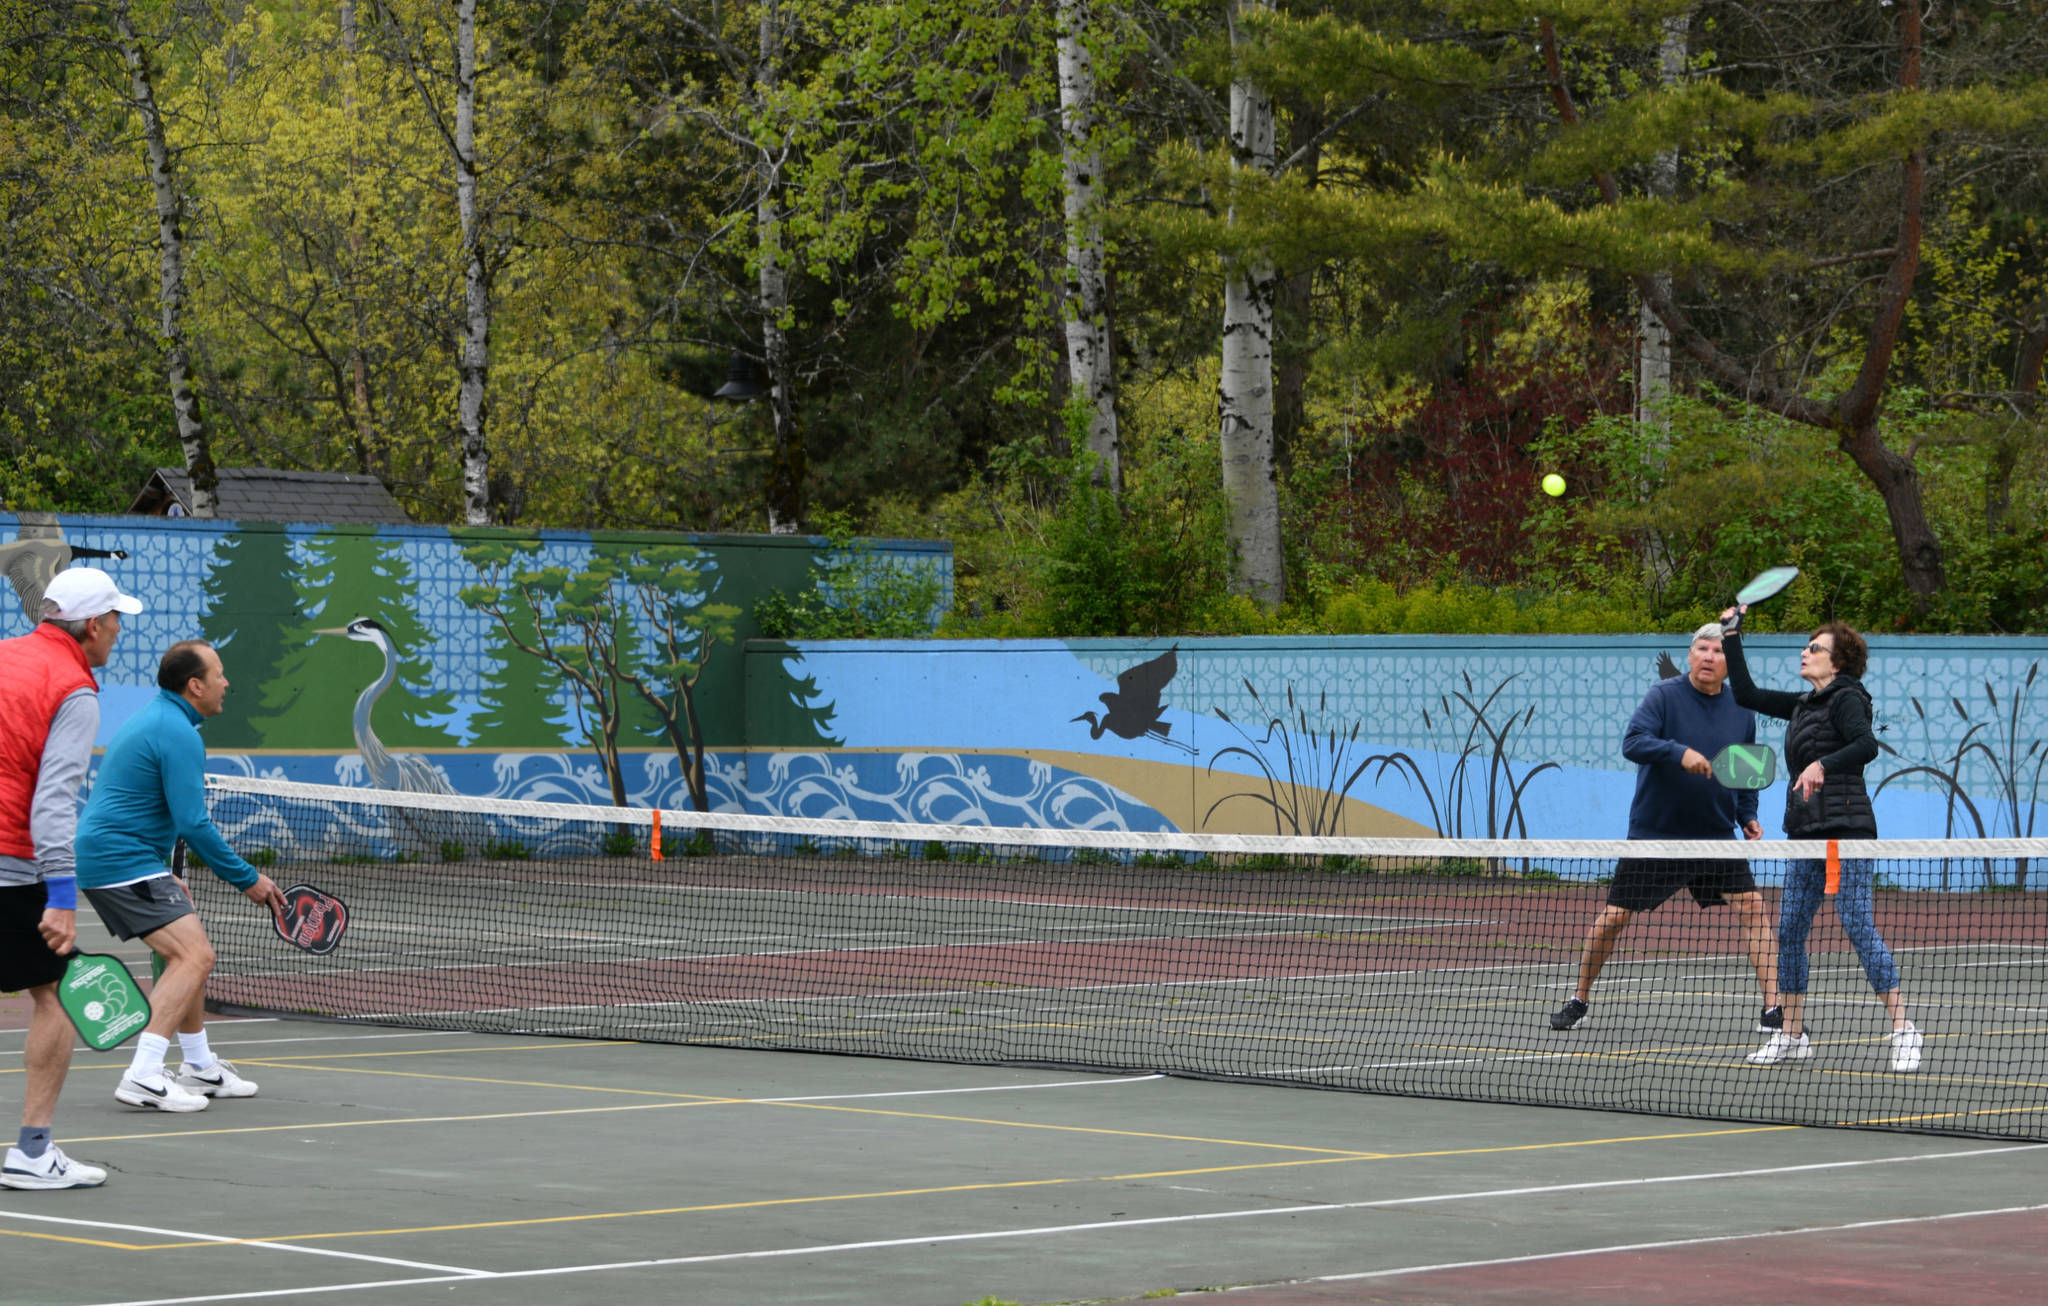 Pickleball players get in some action on the morning of April 27 at Luther Burbank Park. Carolyn Starr connects with the ball while her partner Tom Krazit covers. Their opponents are Van Rex Gallard, far left, and Tom Robinson. Andy Nystrom/ staff photo